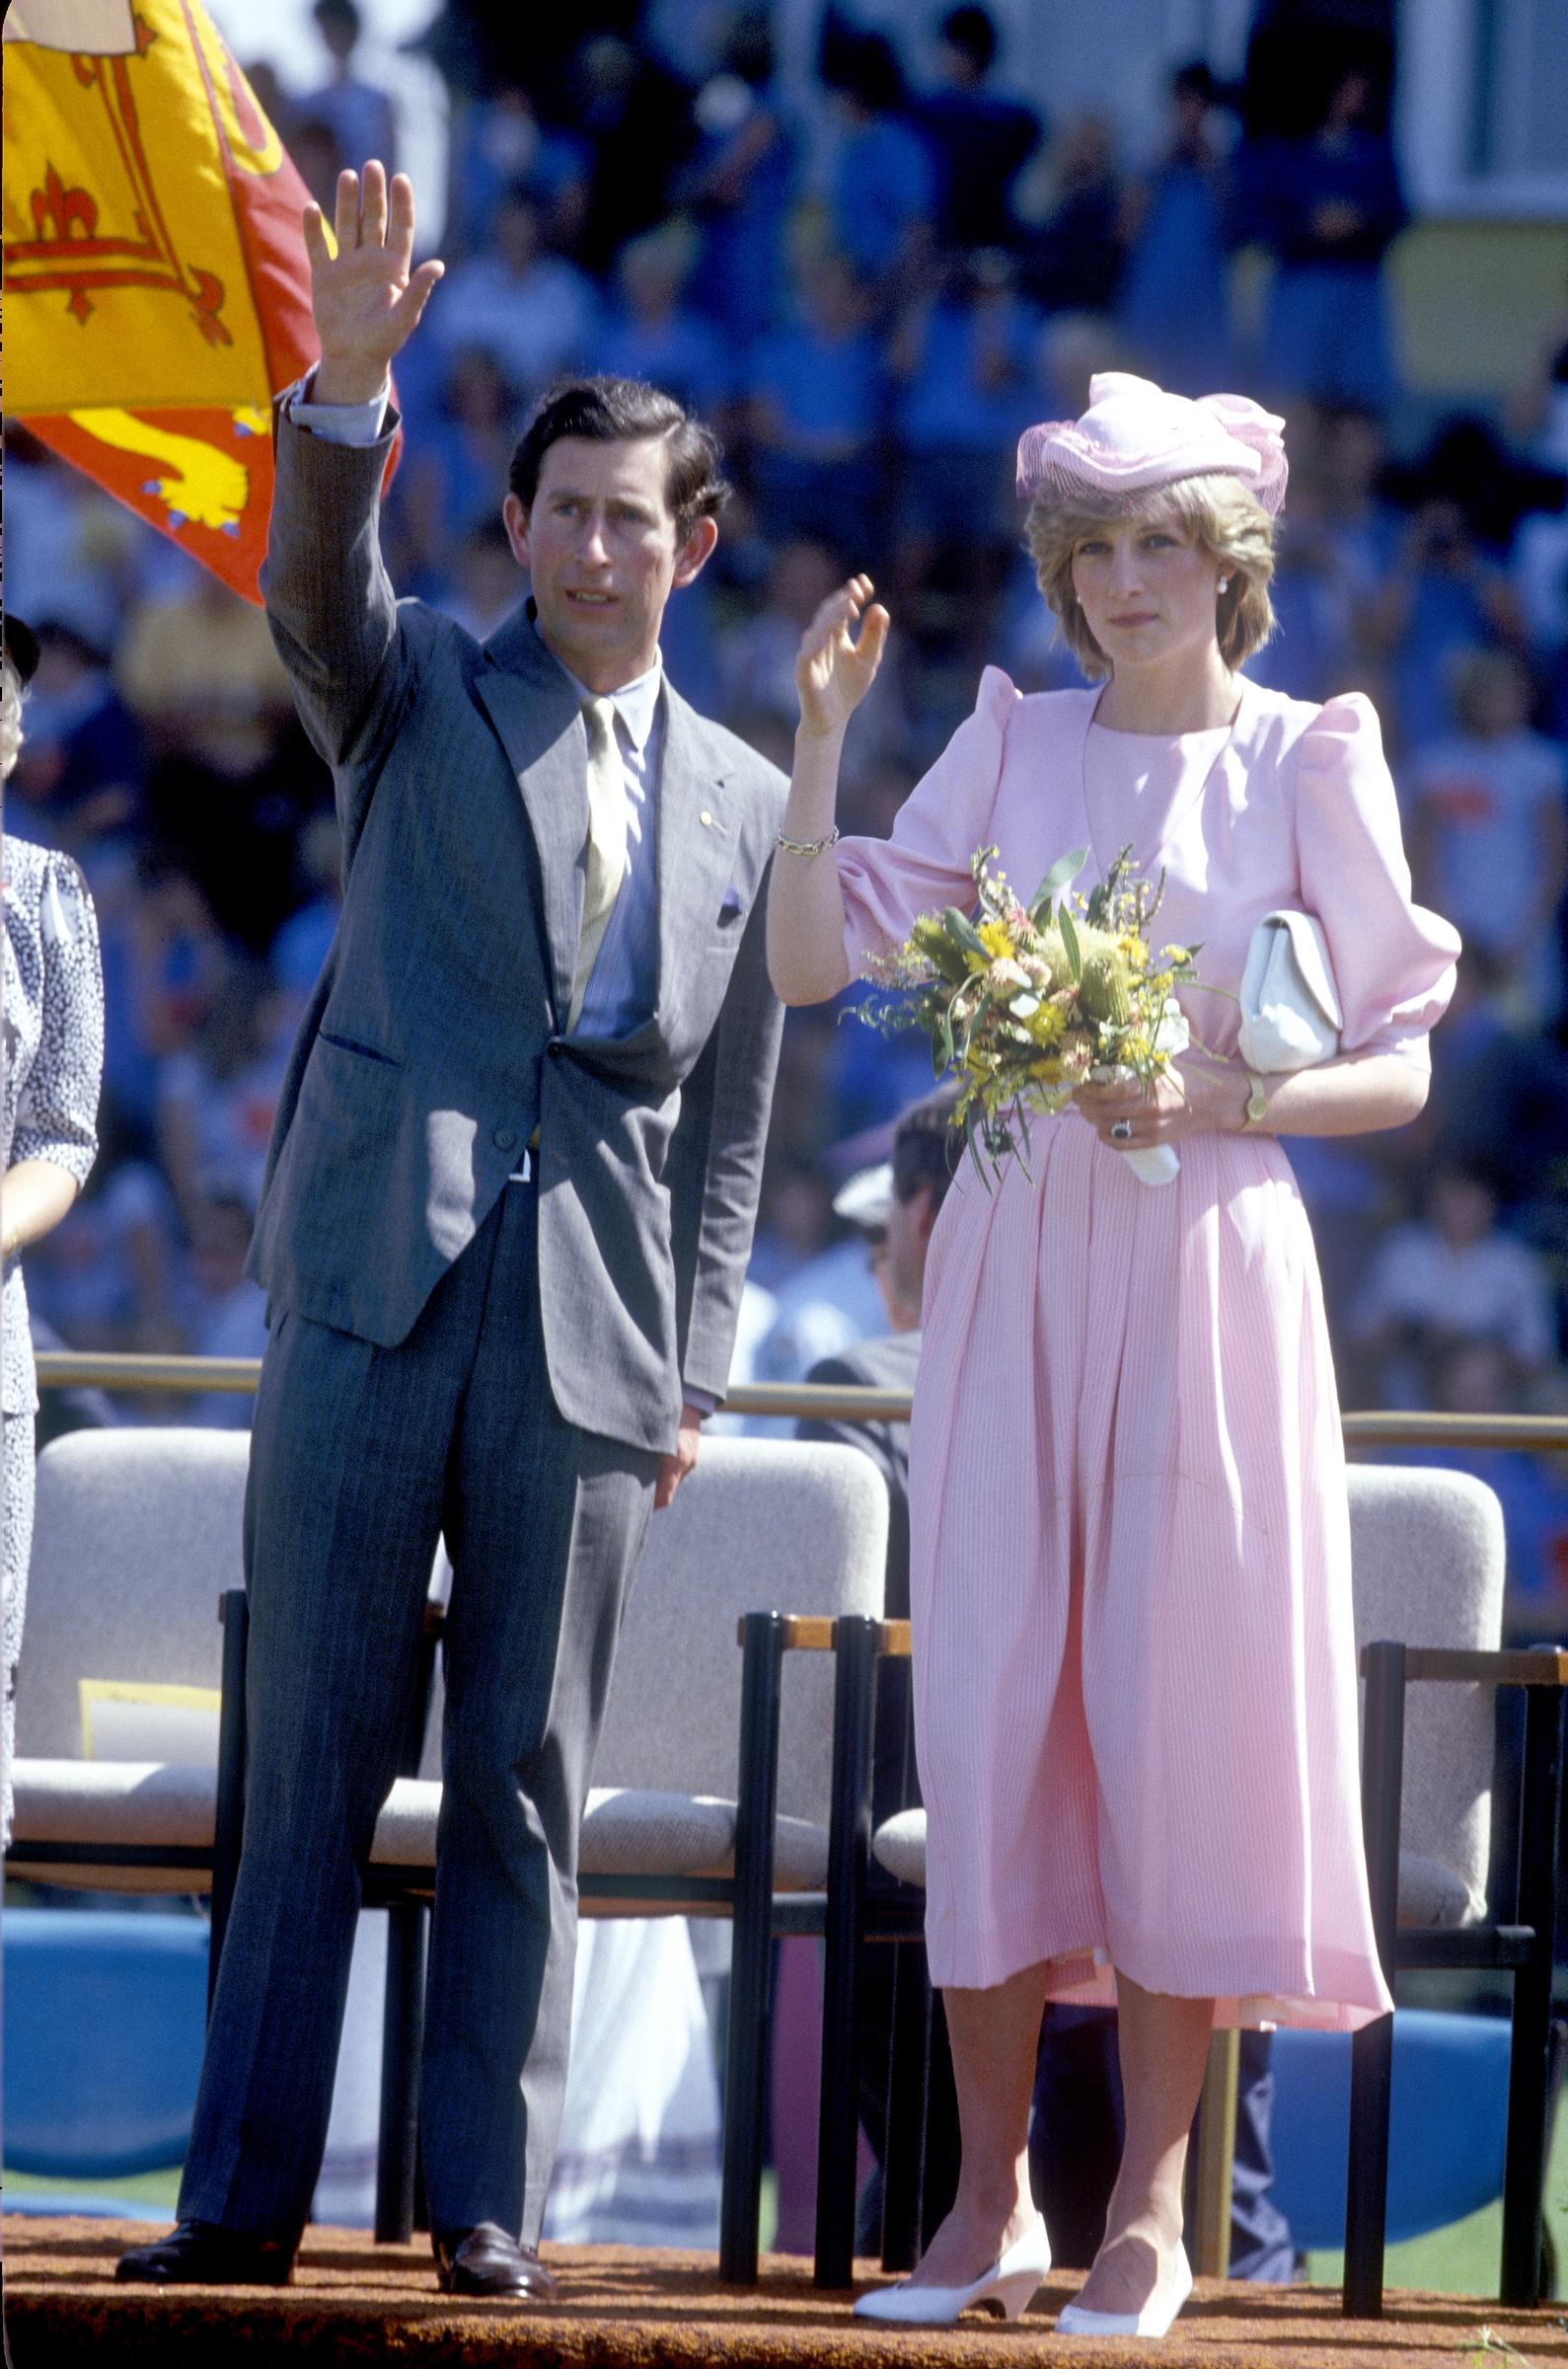 Prince Charles, and Princess Diana visit Australia, At Maitland, New South Wales, on 29th March 1983. | Source: Getty Images